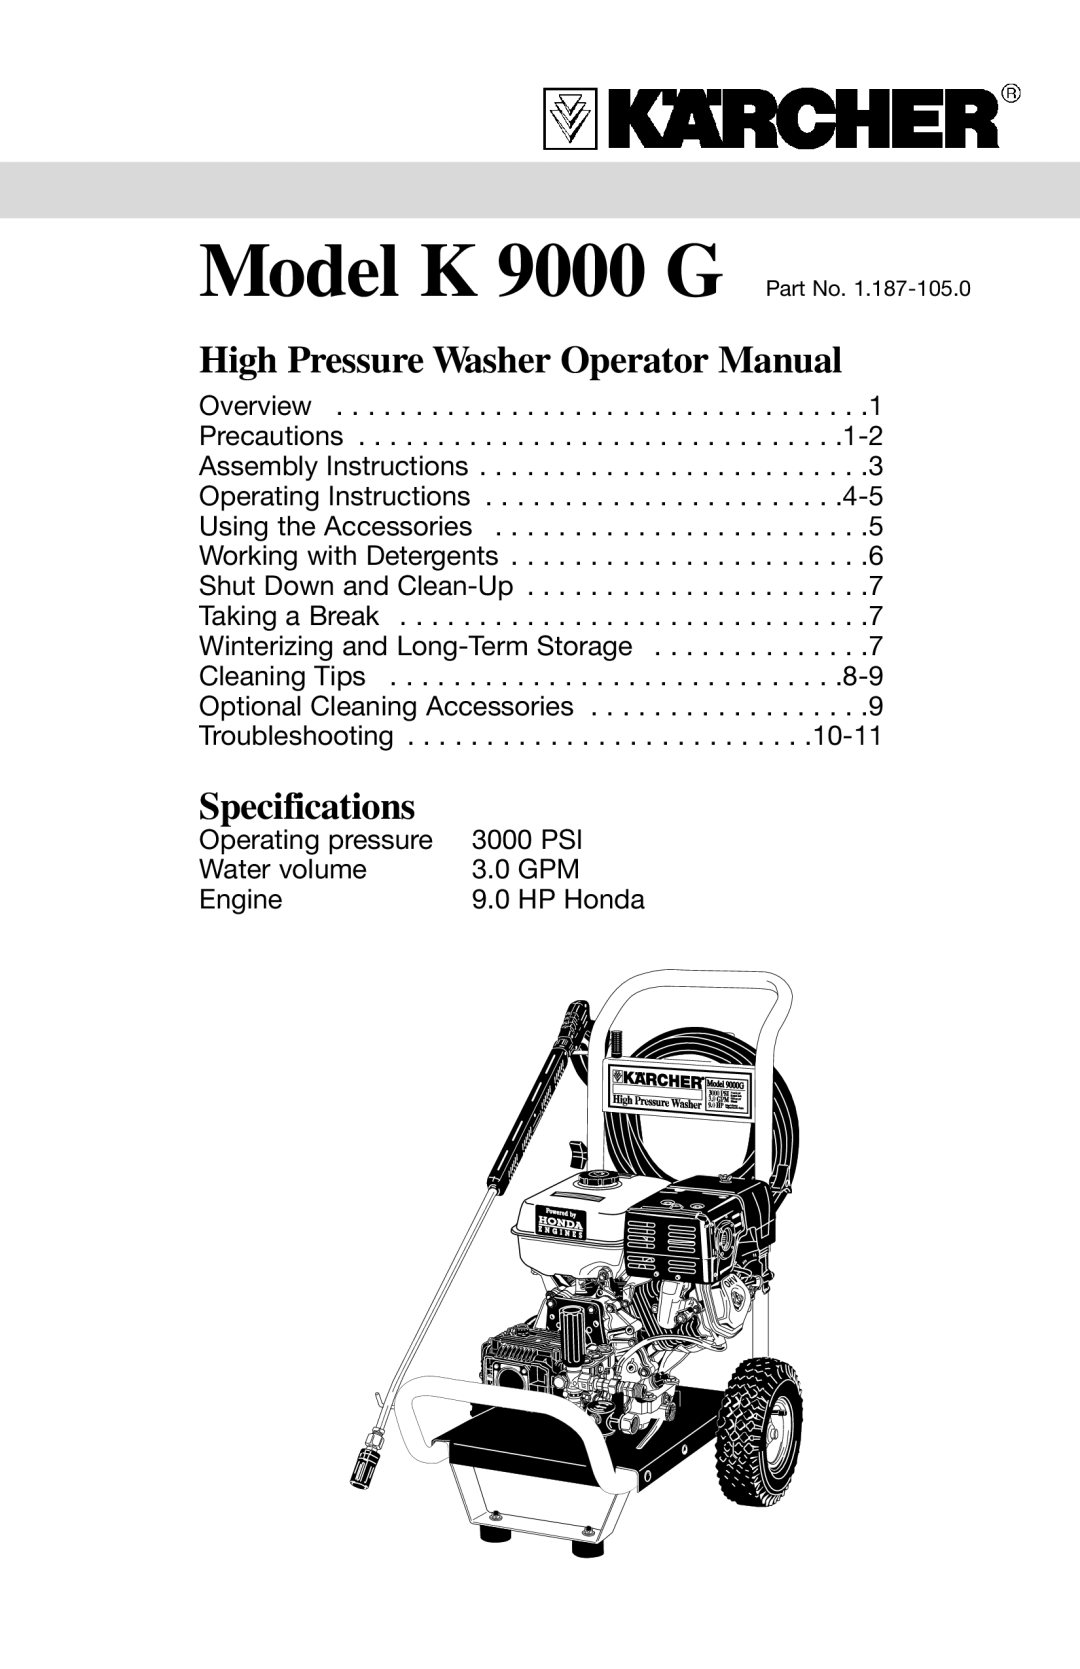 Karcher K9000G specifications High Pressure Washer Operator Manual, Specifications 